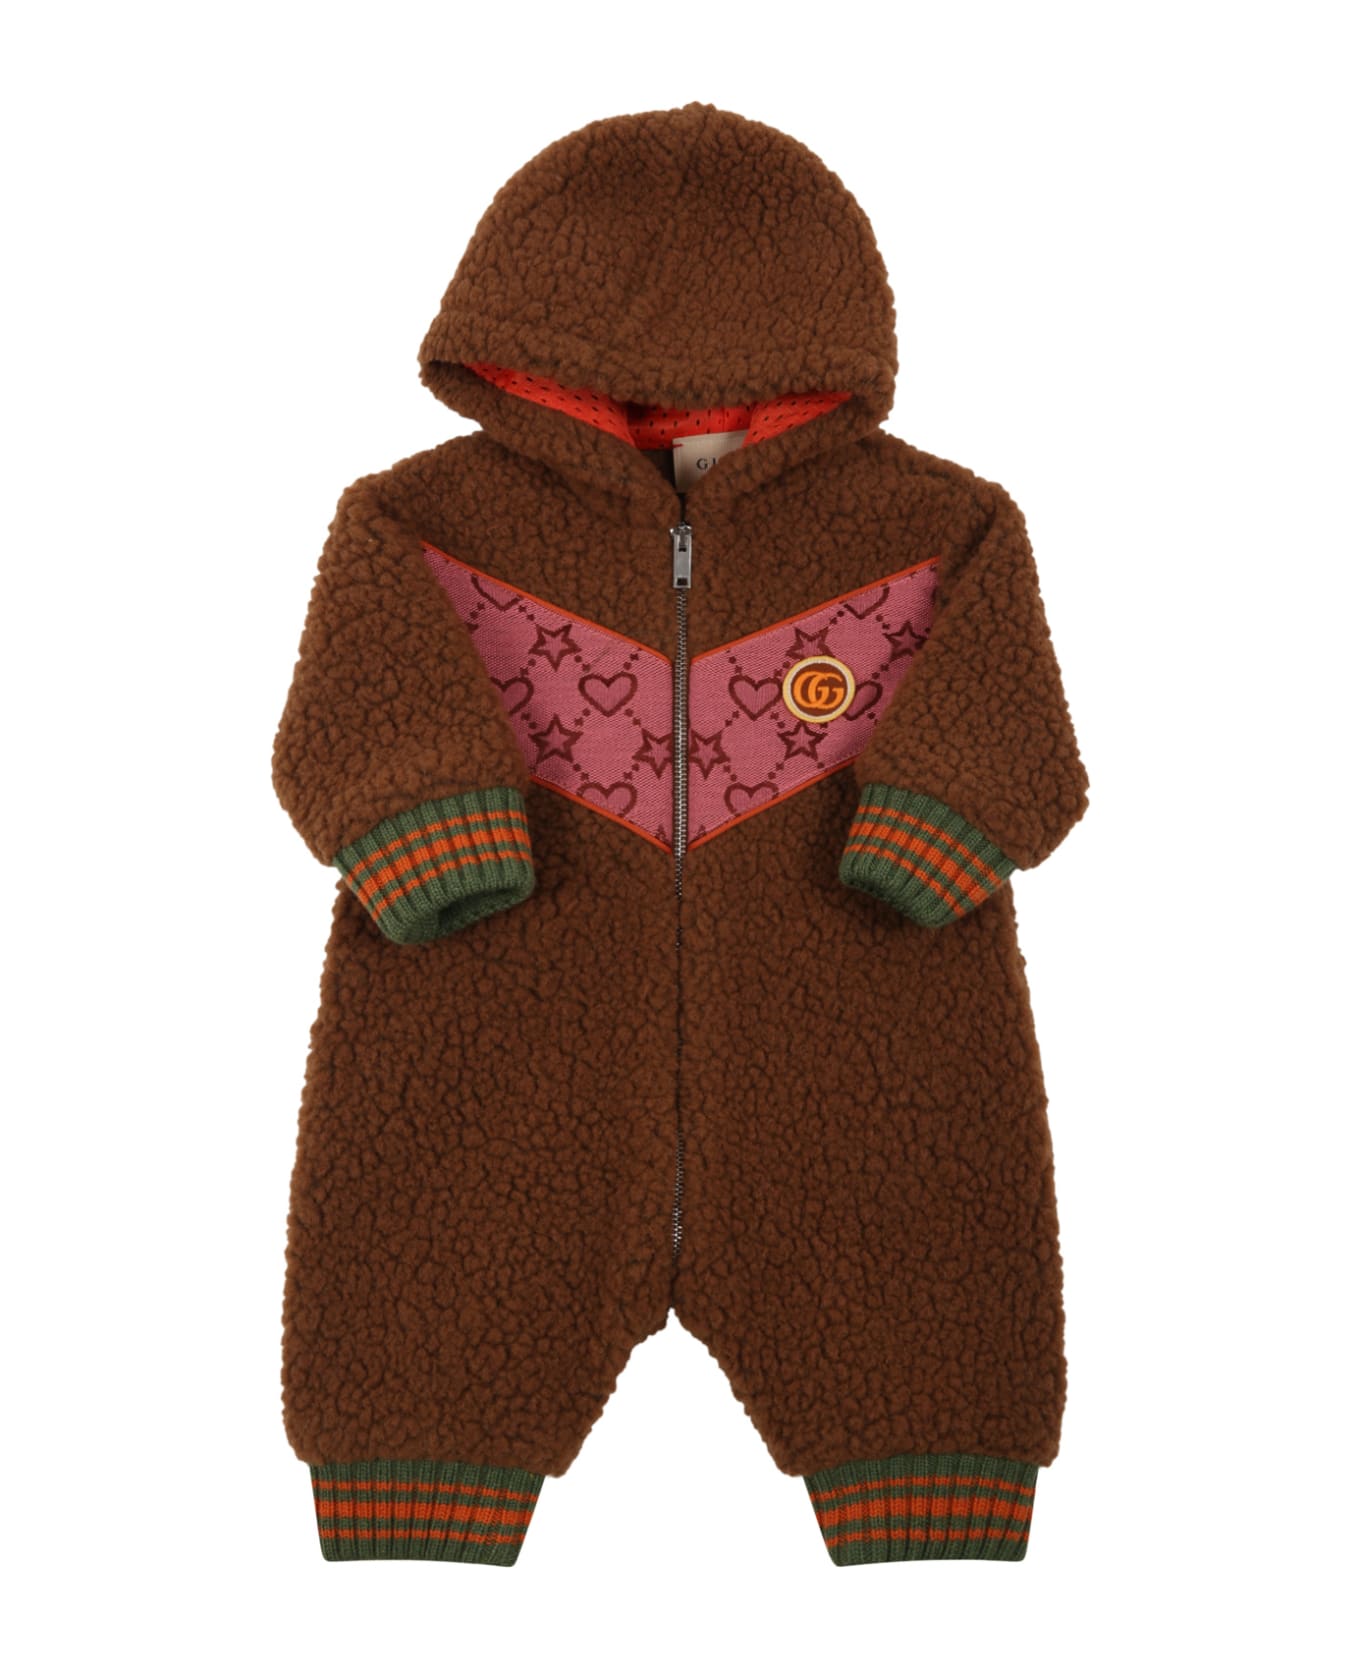 Gucci Brown Jumpsuit For Baby Girl With Hearts, Stars And Logo - Brown